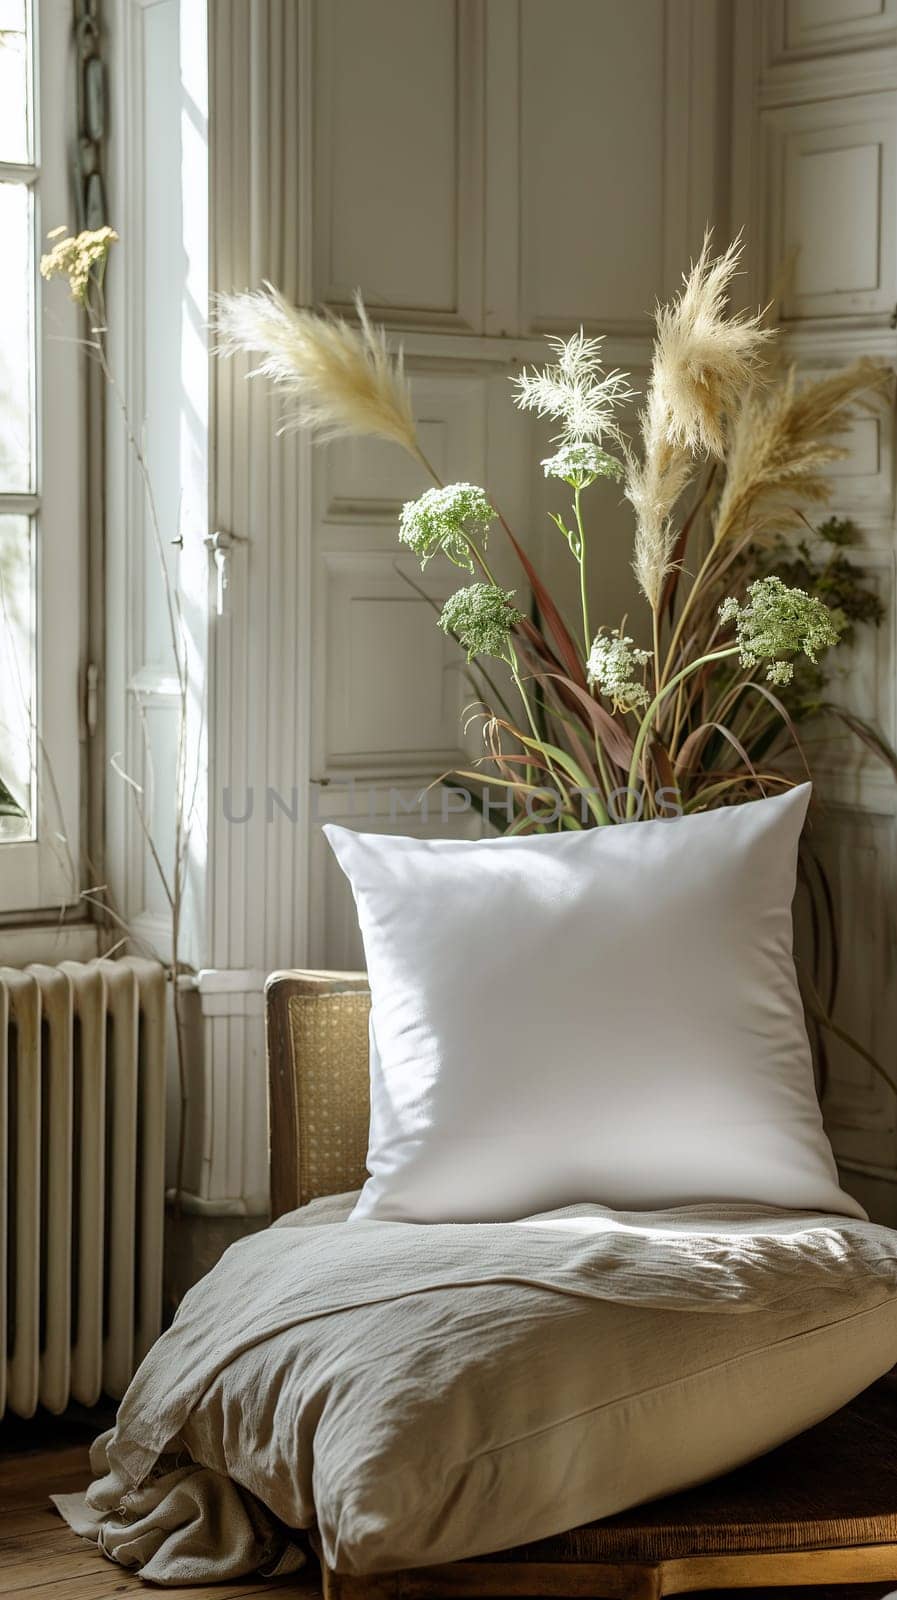 Cozy corner with cushion and dried floral arrangement by chrisroll